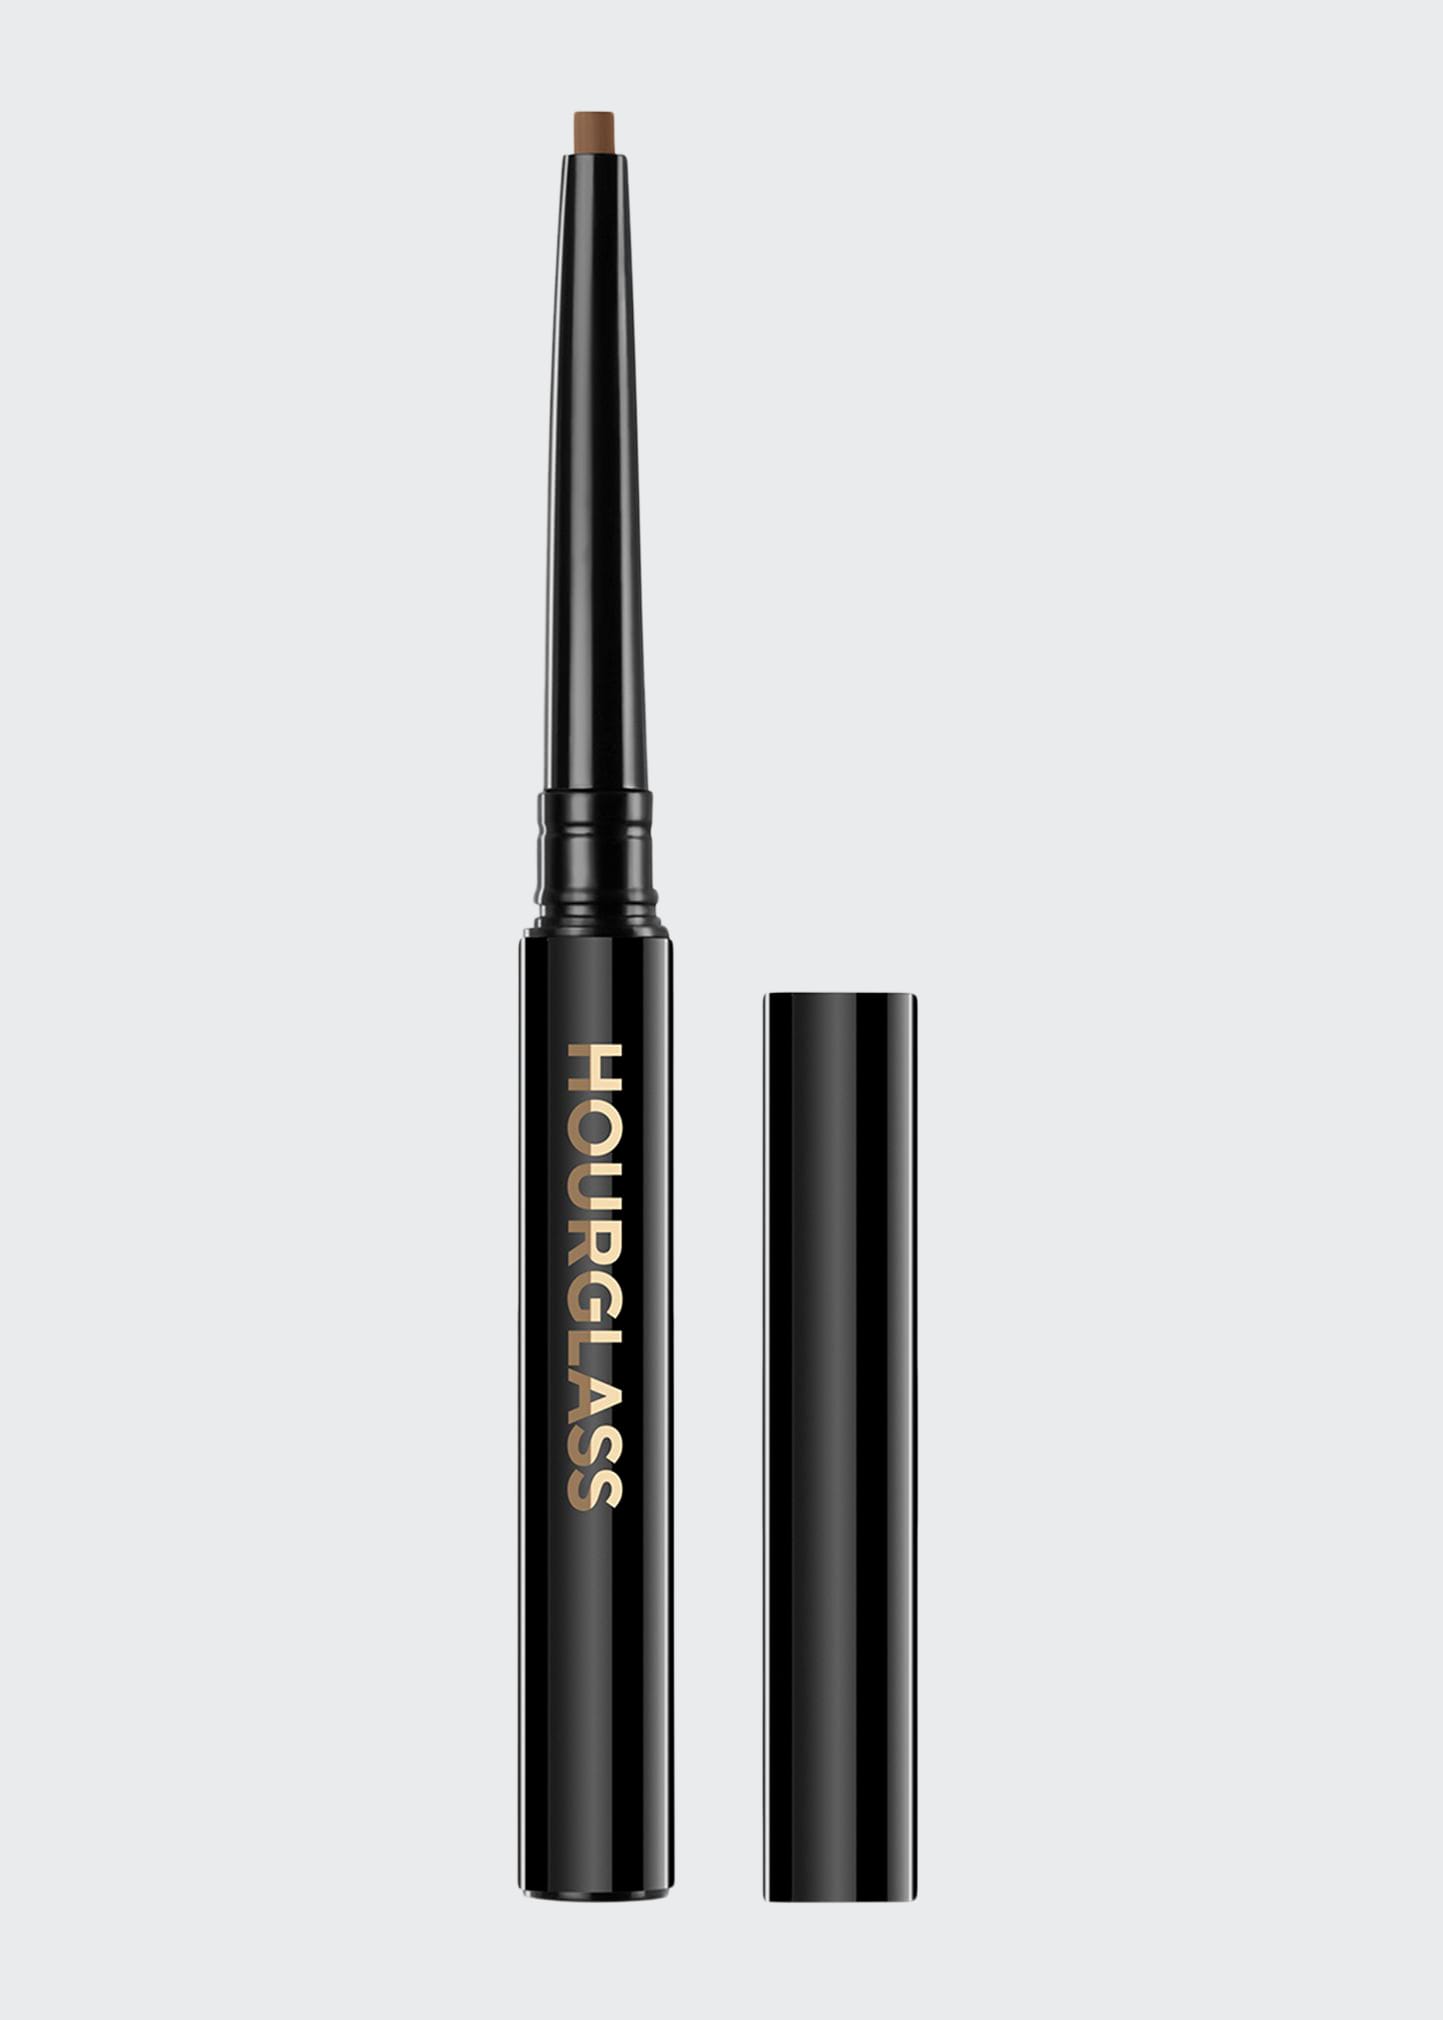 Hourglass Arch Brow Micro Sculpting Pencil, Travel Size In Blonde